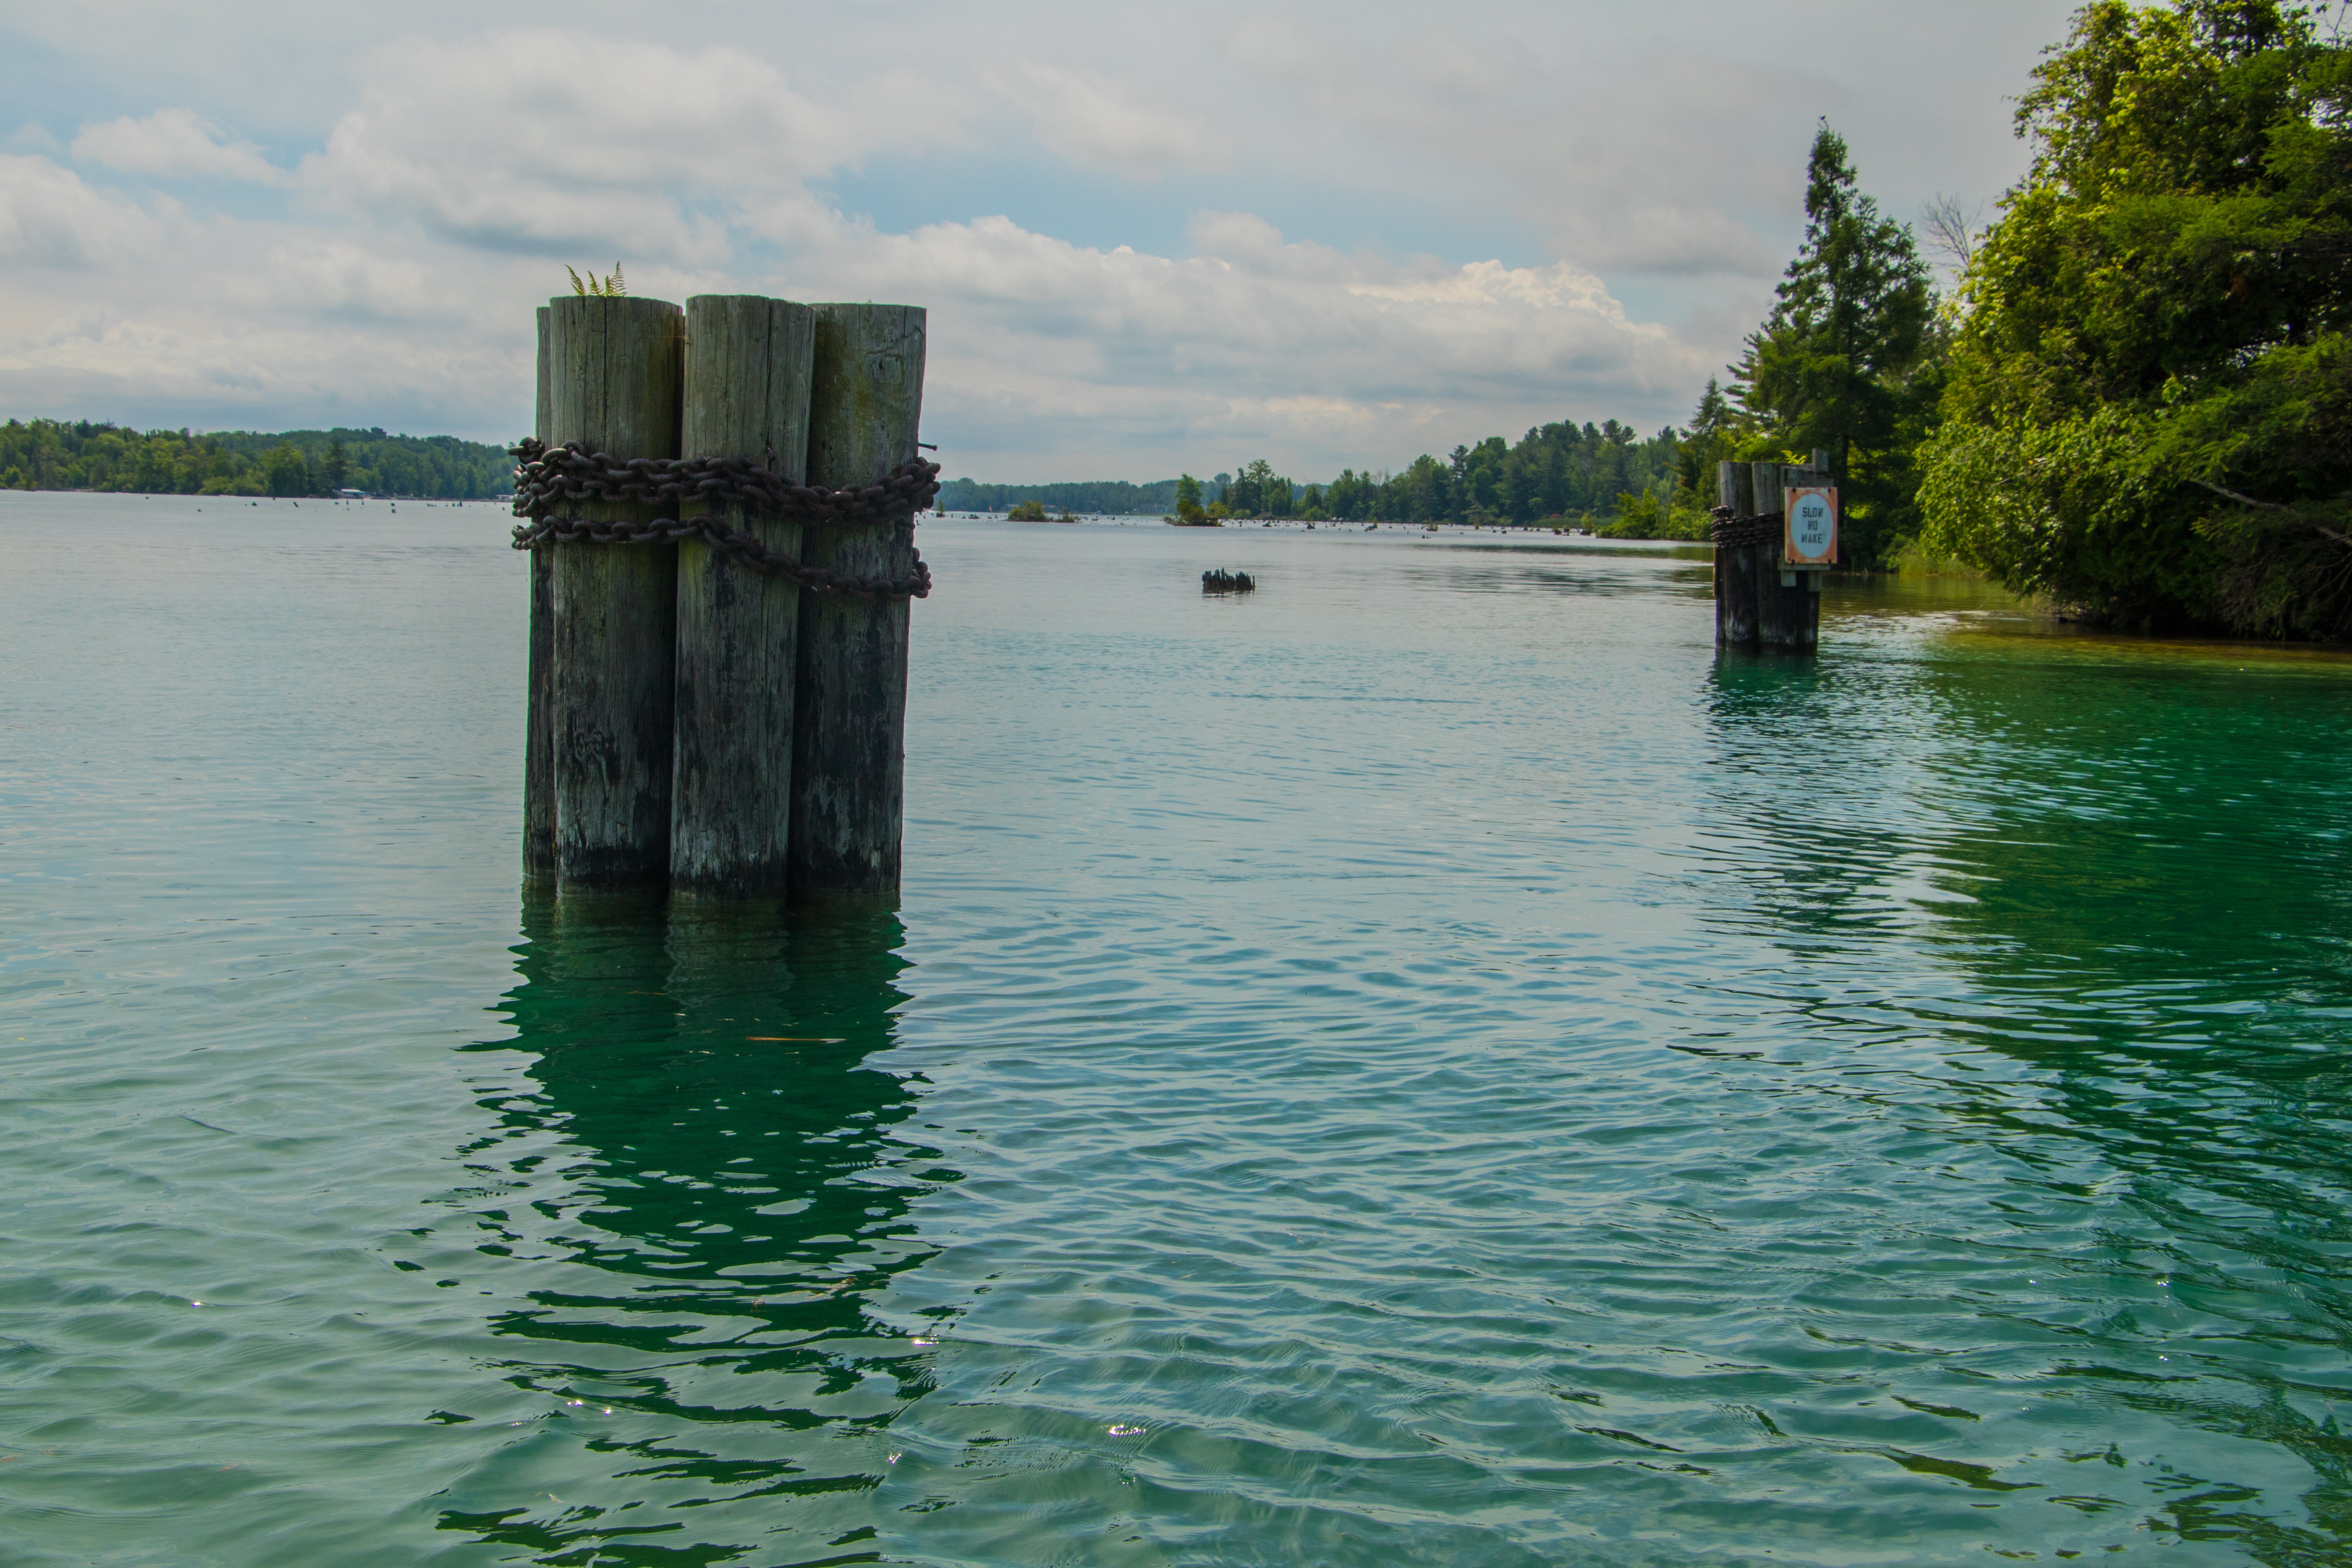 If your boat is seeking a larger lake, Elk Lake is just across the main road from the campground.